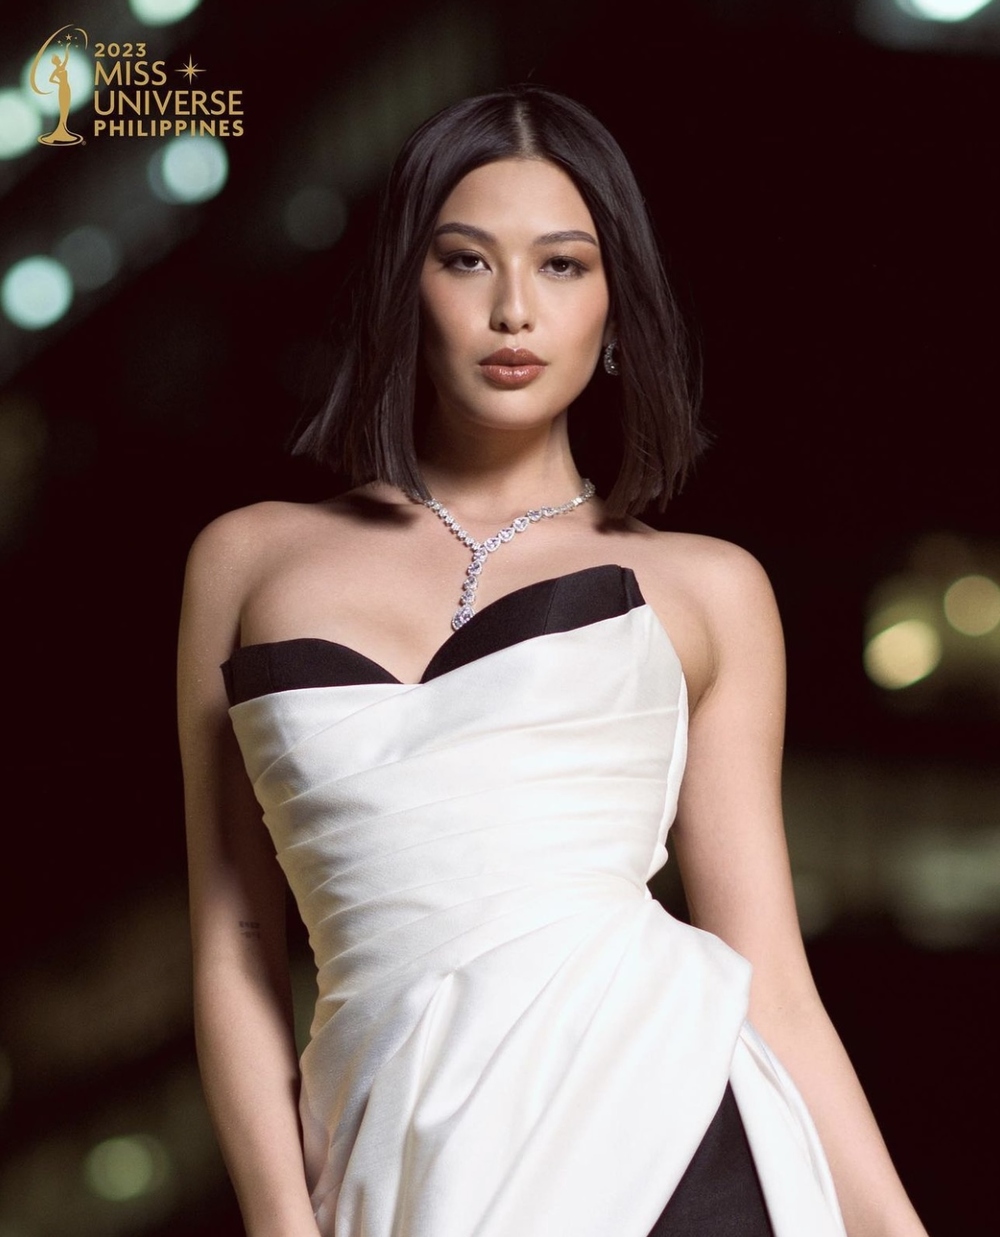 Get to know Miss Universe PH 2023 Michelle Dee | PEP.ph